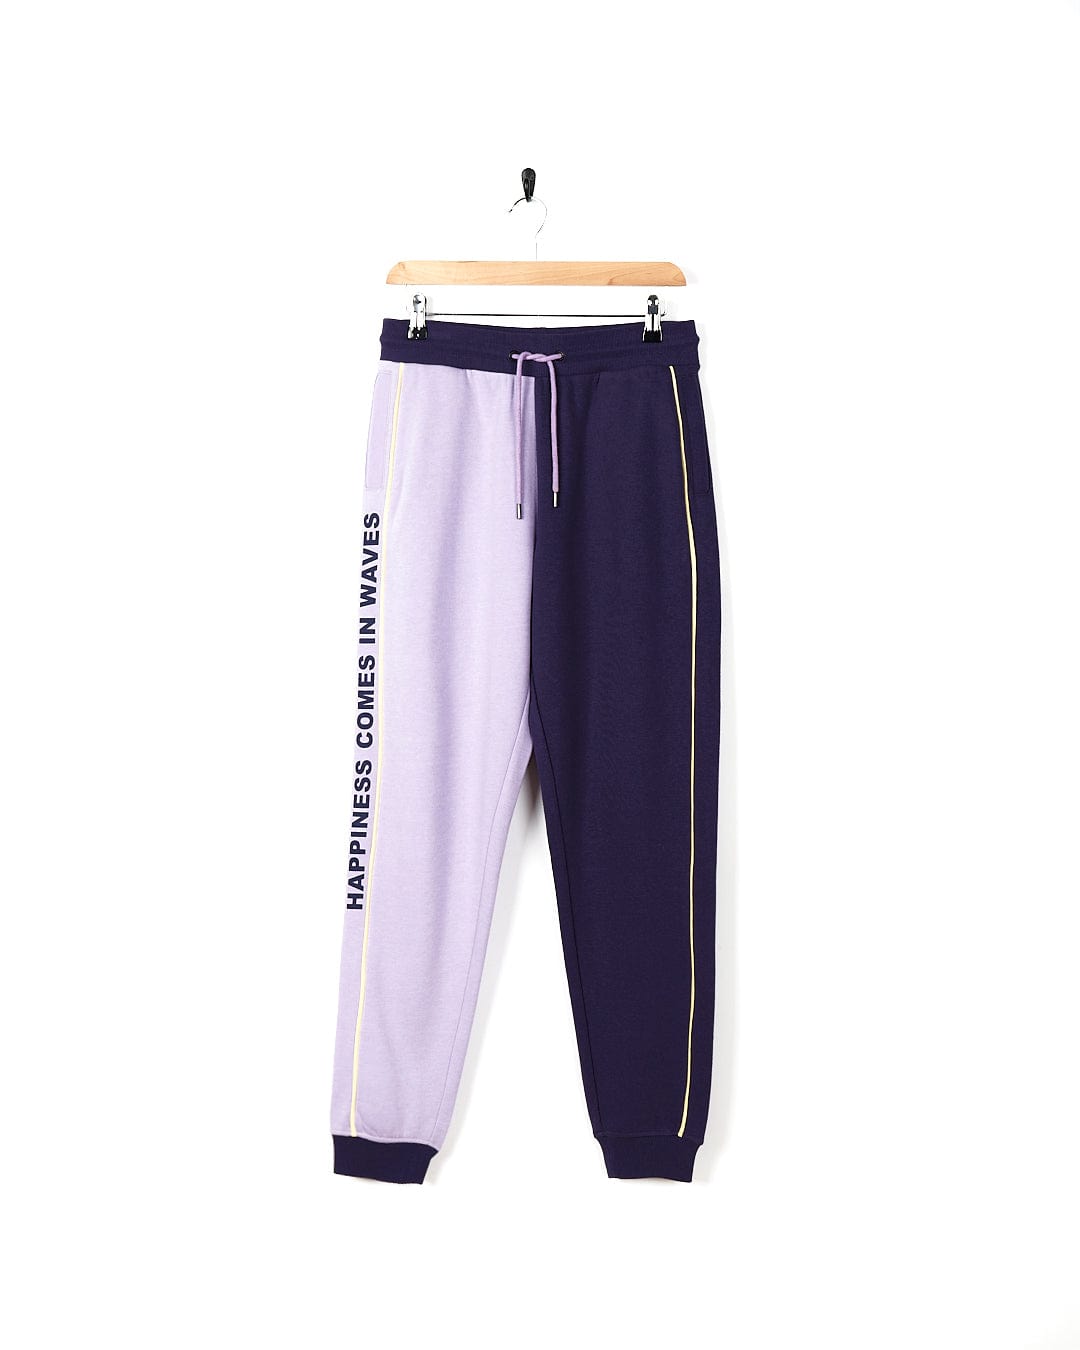 A pair of Betty - Womens Jogger - Light Purple sweatpants hanging on a hanger.